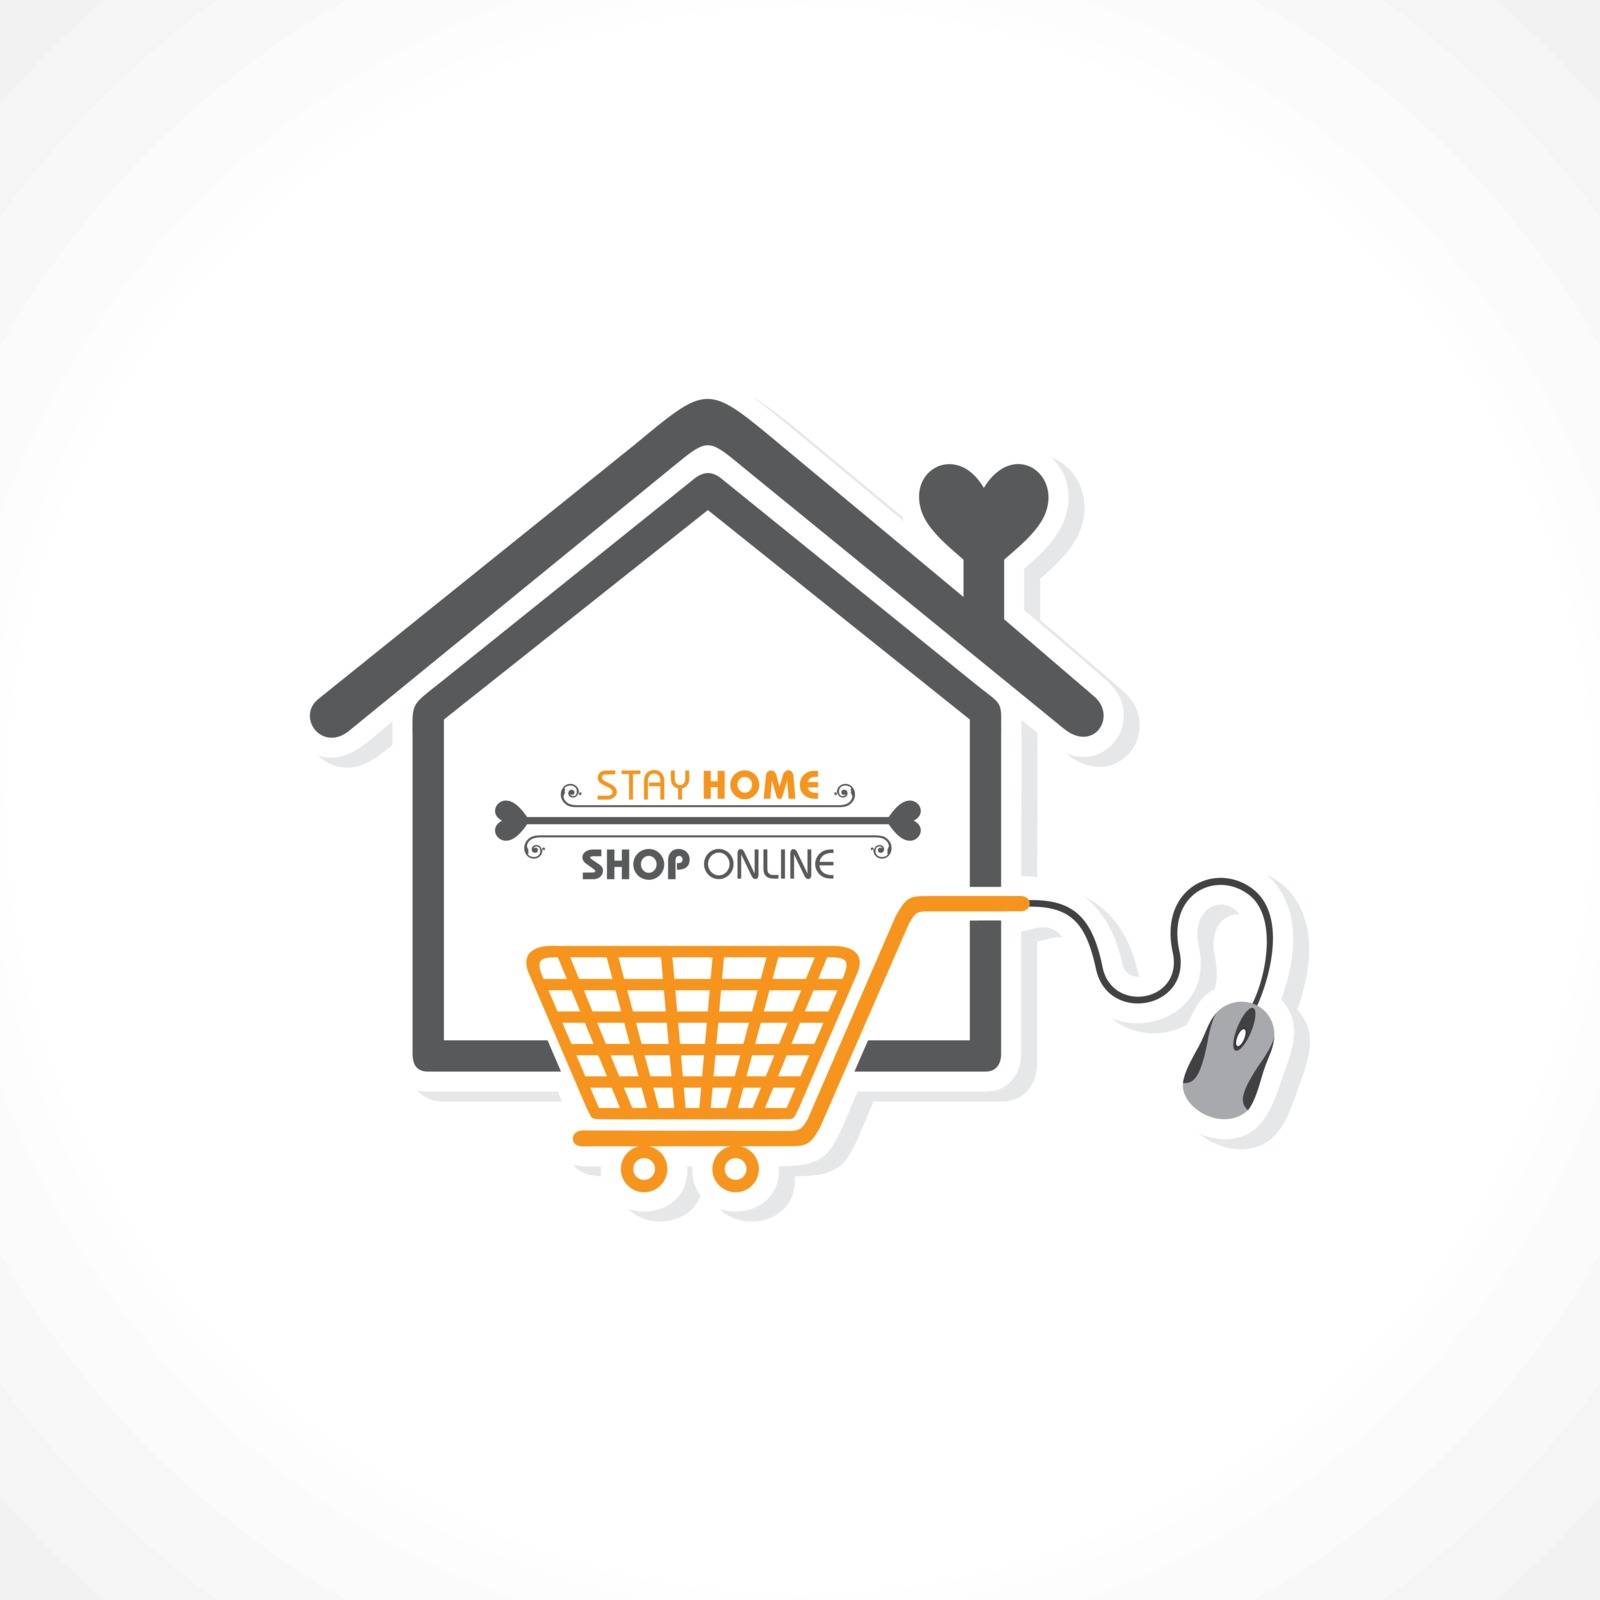 Vector Illustration for Stay Home, Stay Safe and Online shopping with free and express delivery Concept